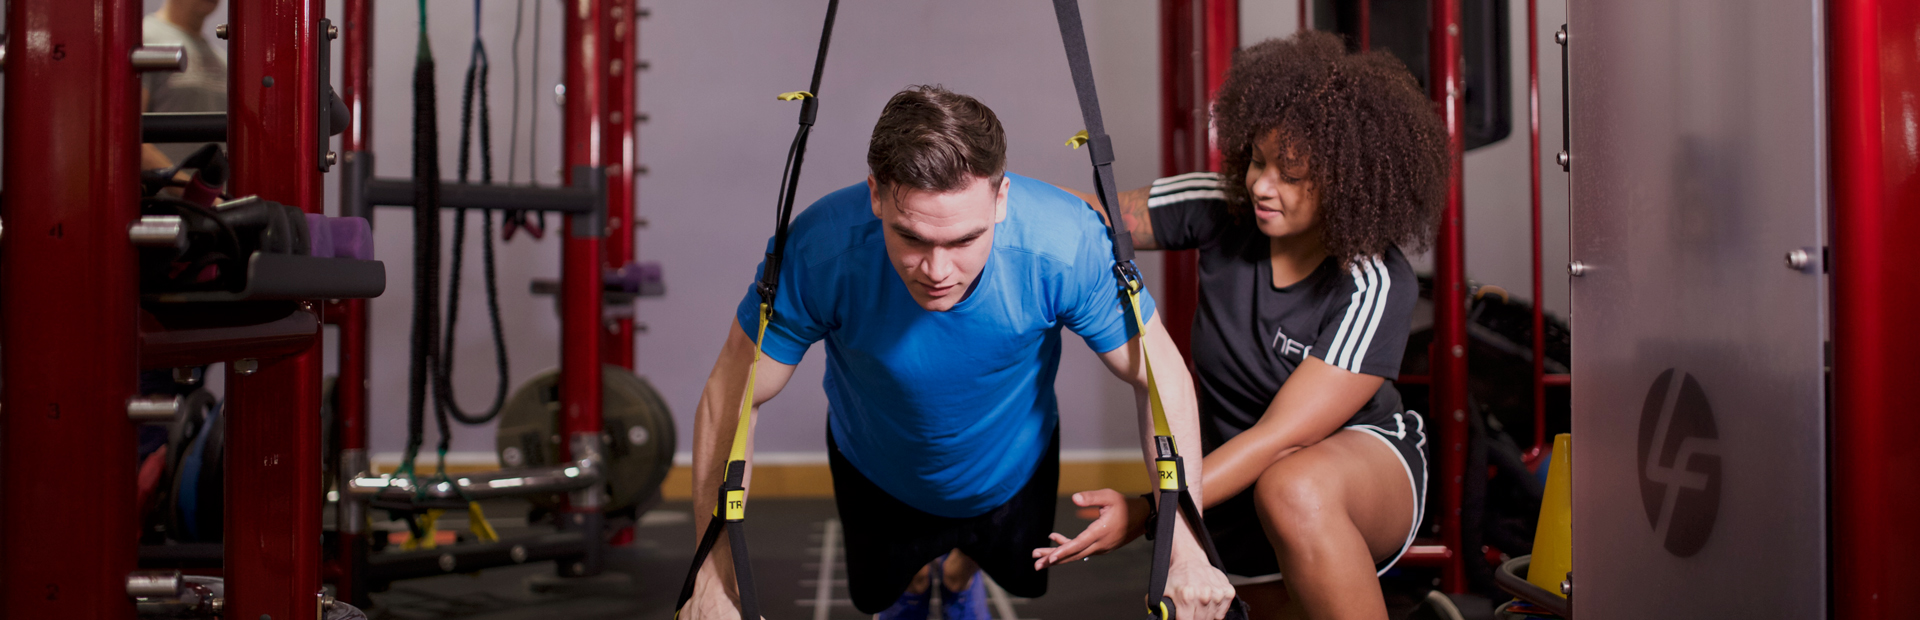 A self-employed personal trainer working with a client on TRX suspension straps